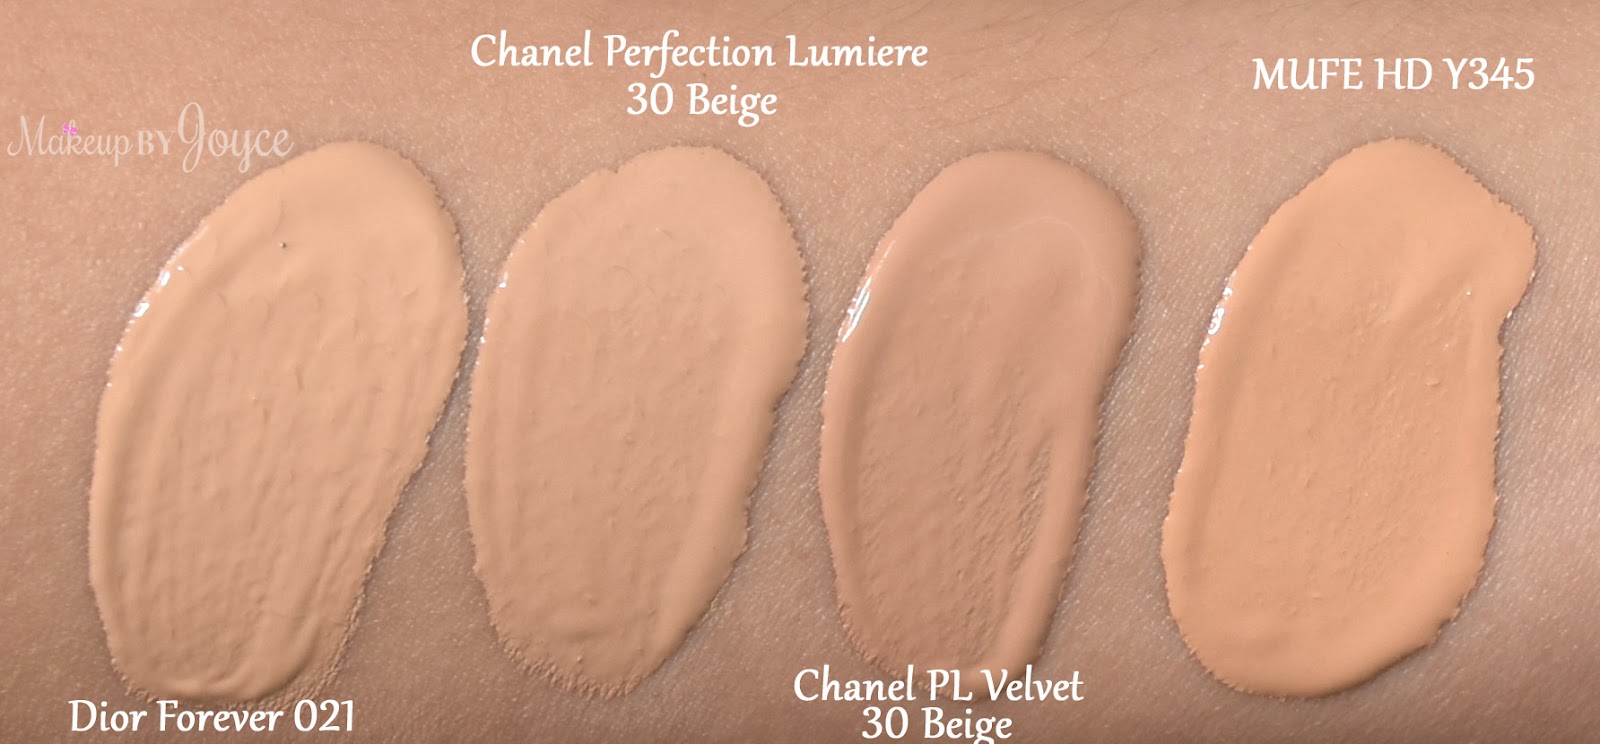 Review: Chanel Perfection Lumiére Velvet Smooth Effect Makeup